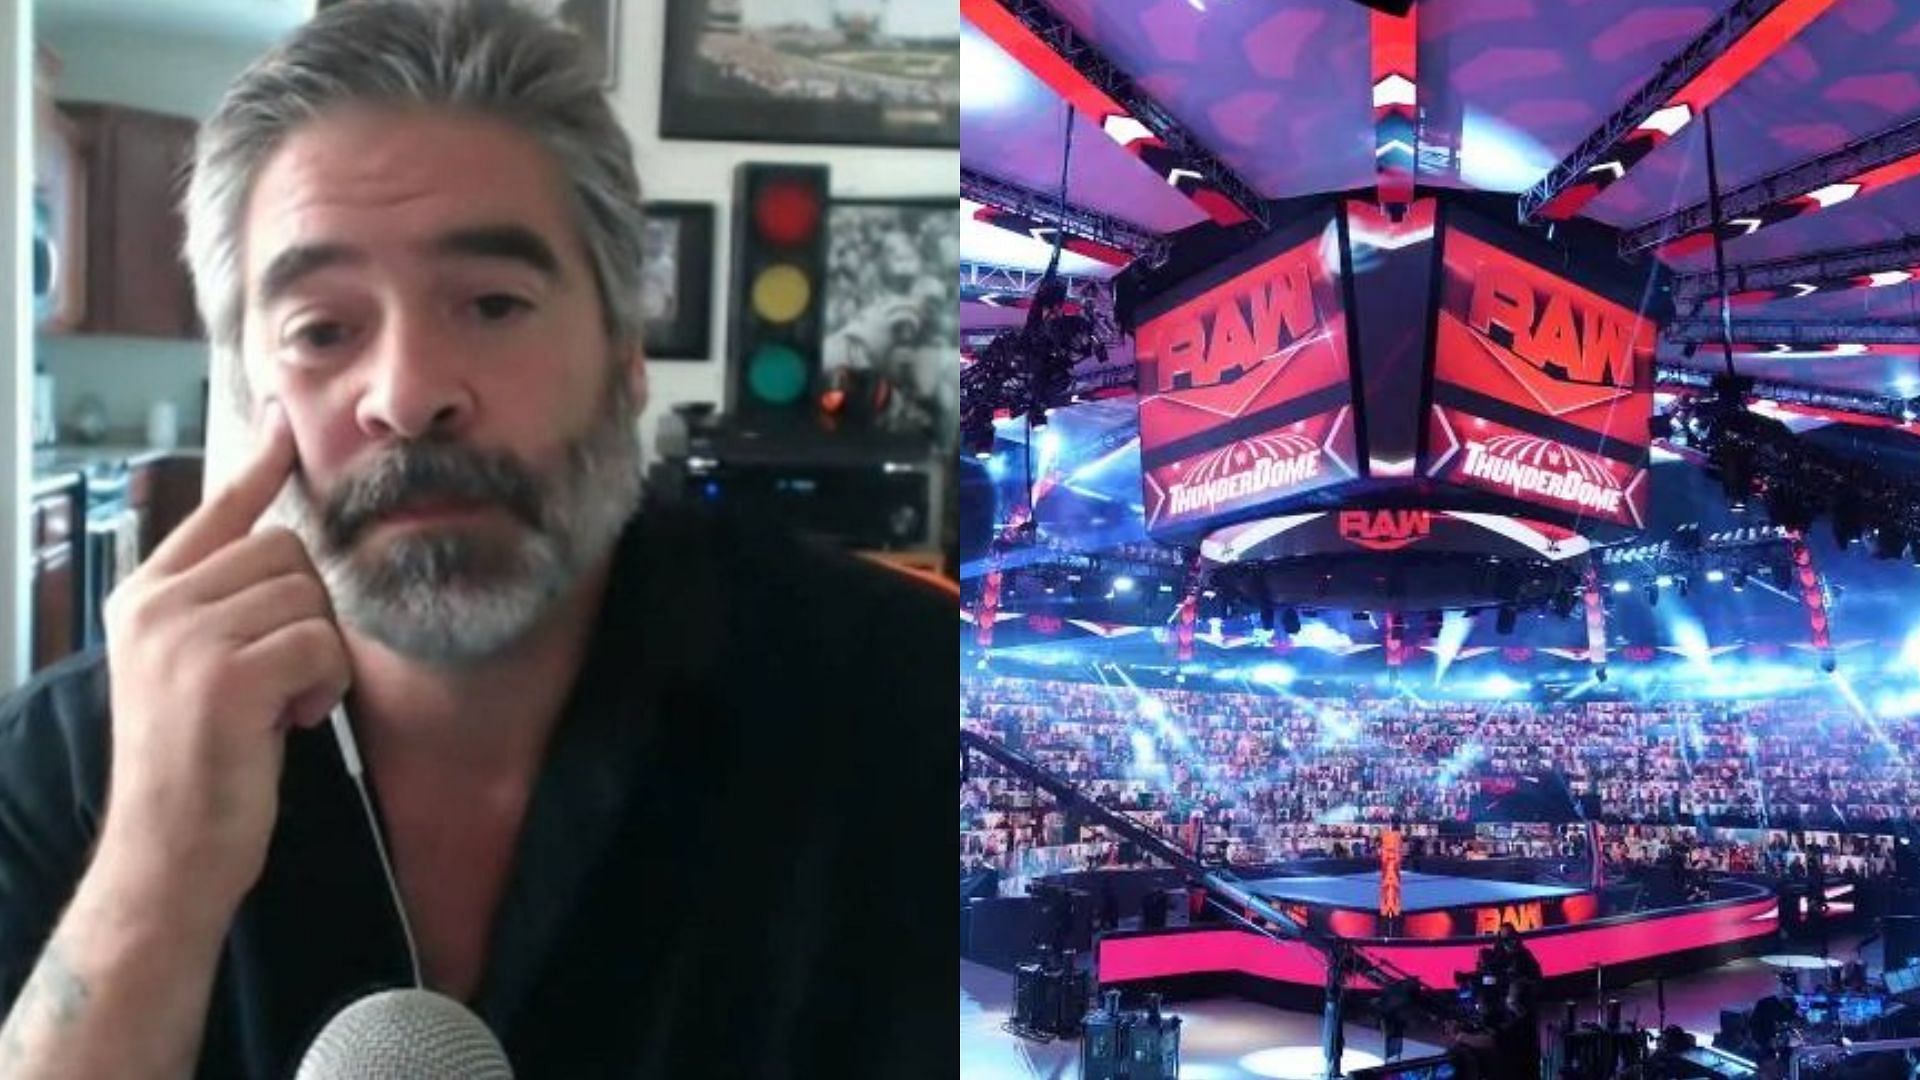 Vince Russo previously revealed that he worked secretly as a consultant for the USA Network